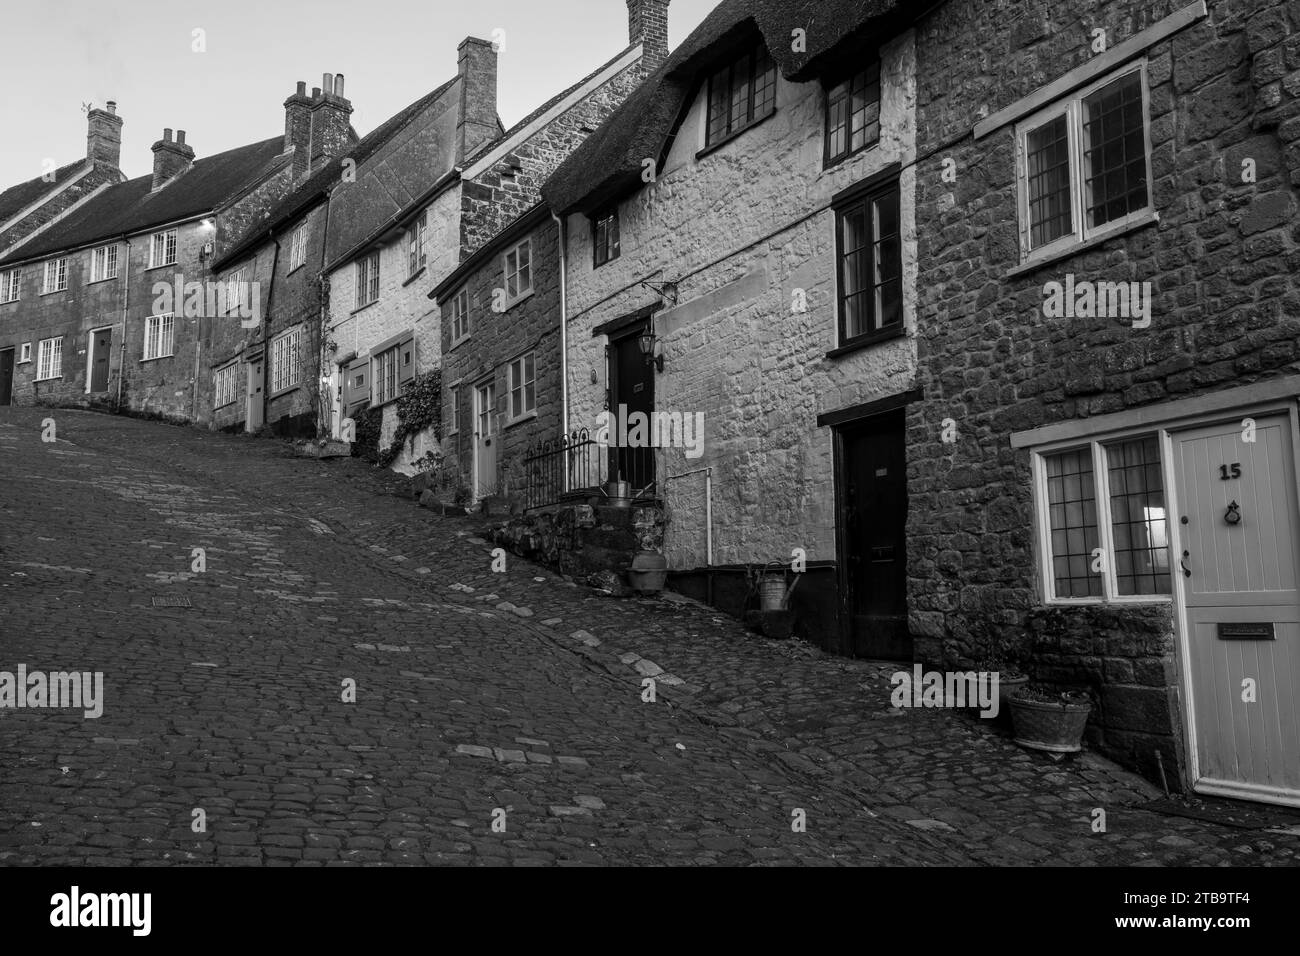 View from the bottom of Gold Hill in Shaftesbury which is famous for the Boy On The Bike tv commercial Stock Photo